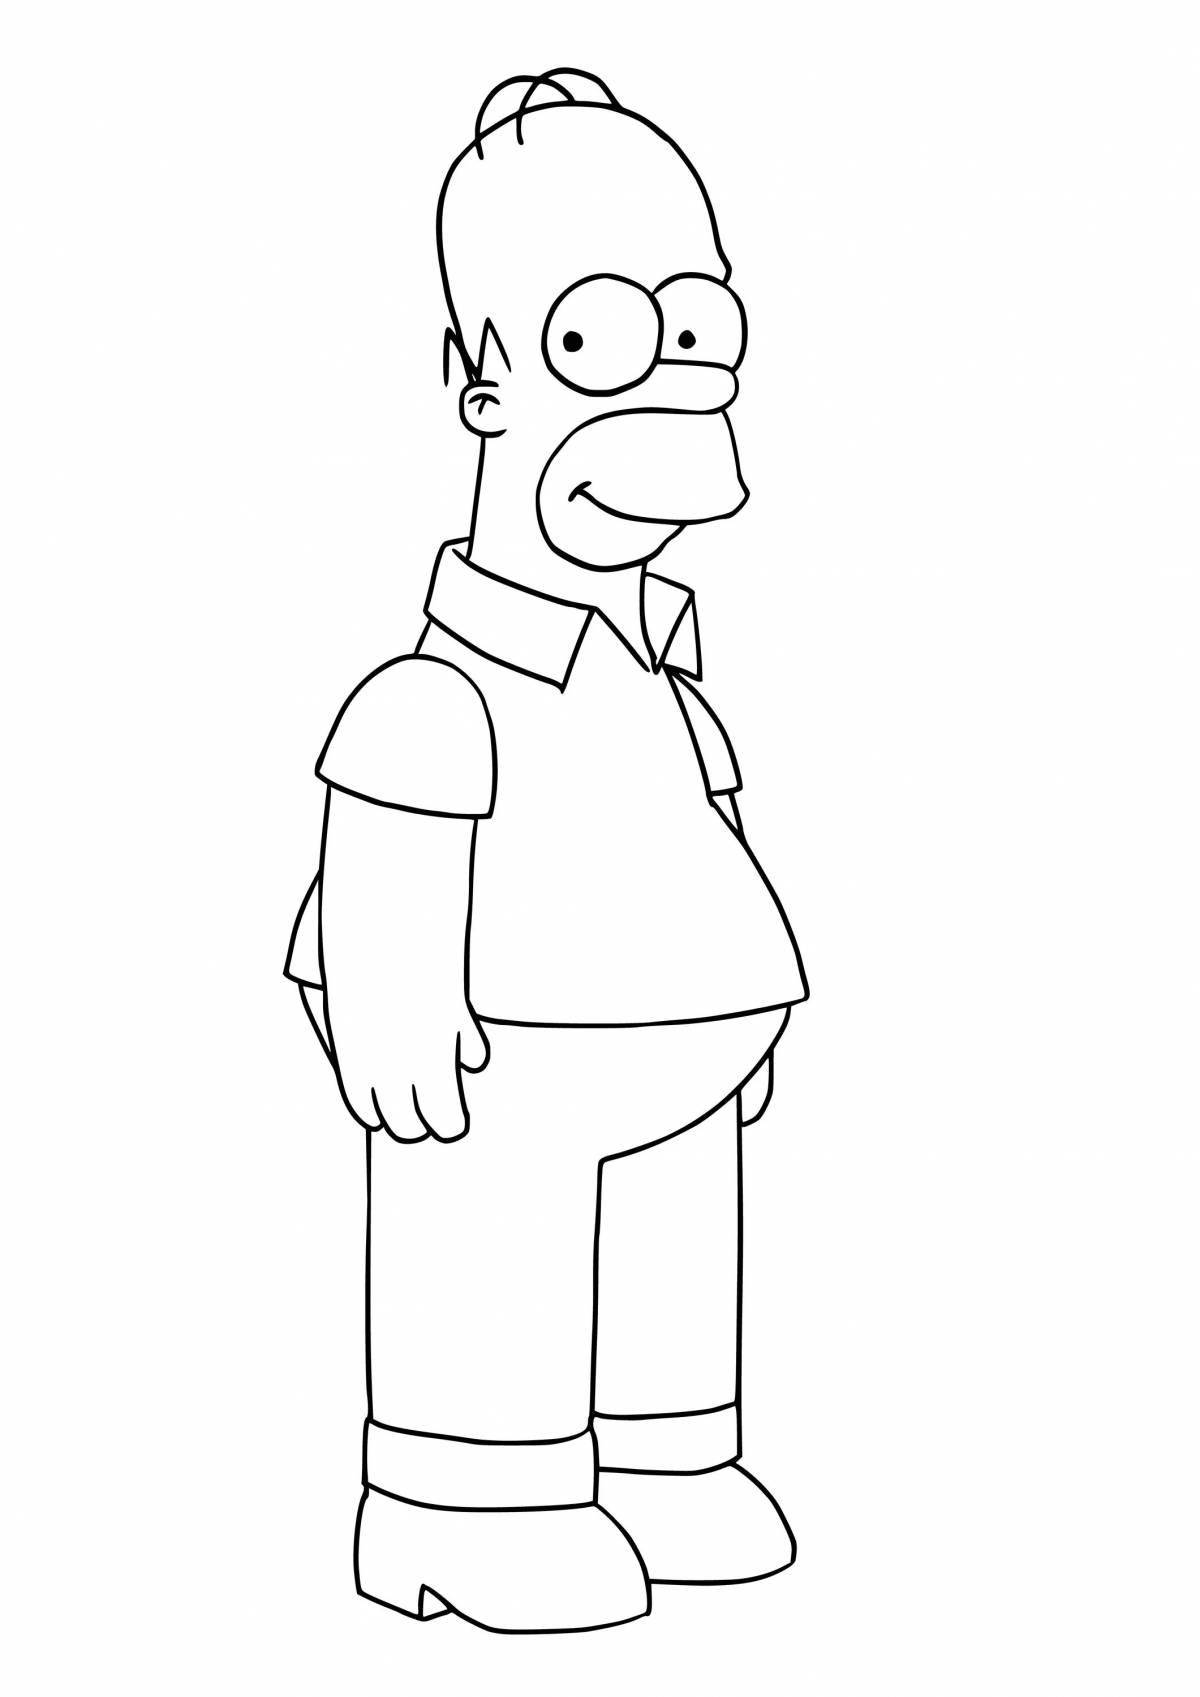 Playful homer simpson coloring page